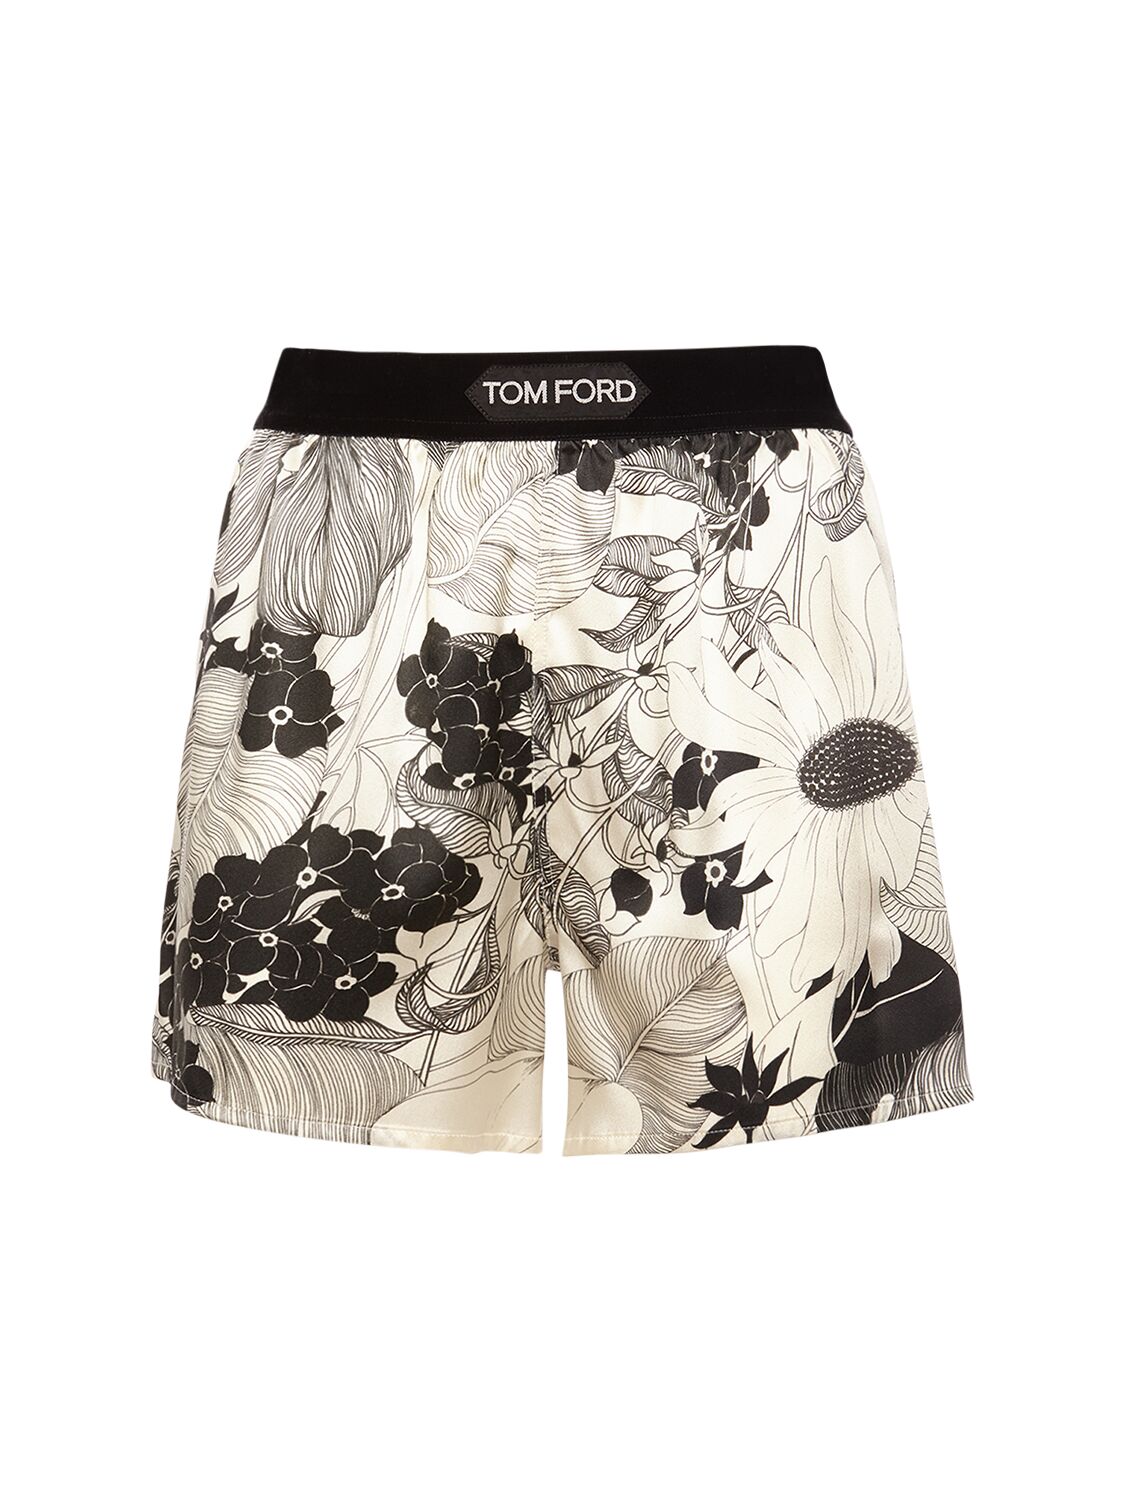 TOM FORD FLORAL PRINTED SILK SATIN BOXERS